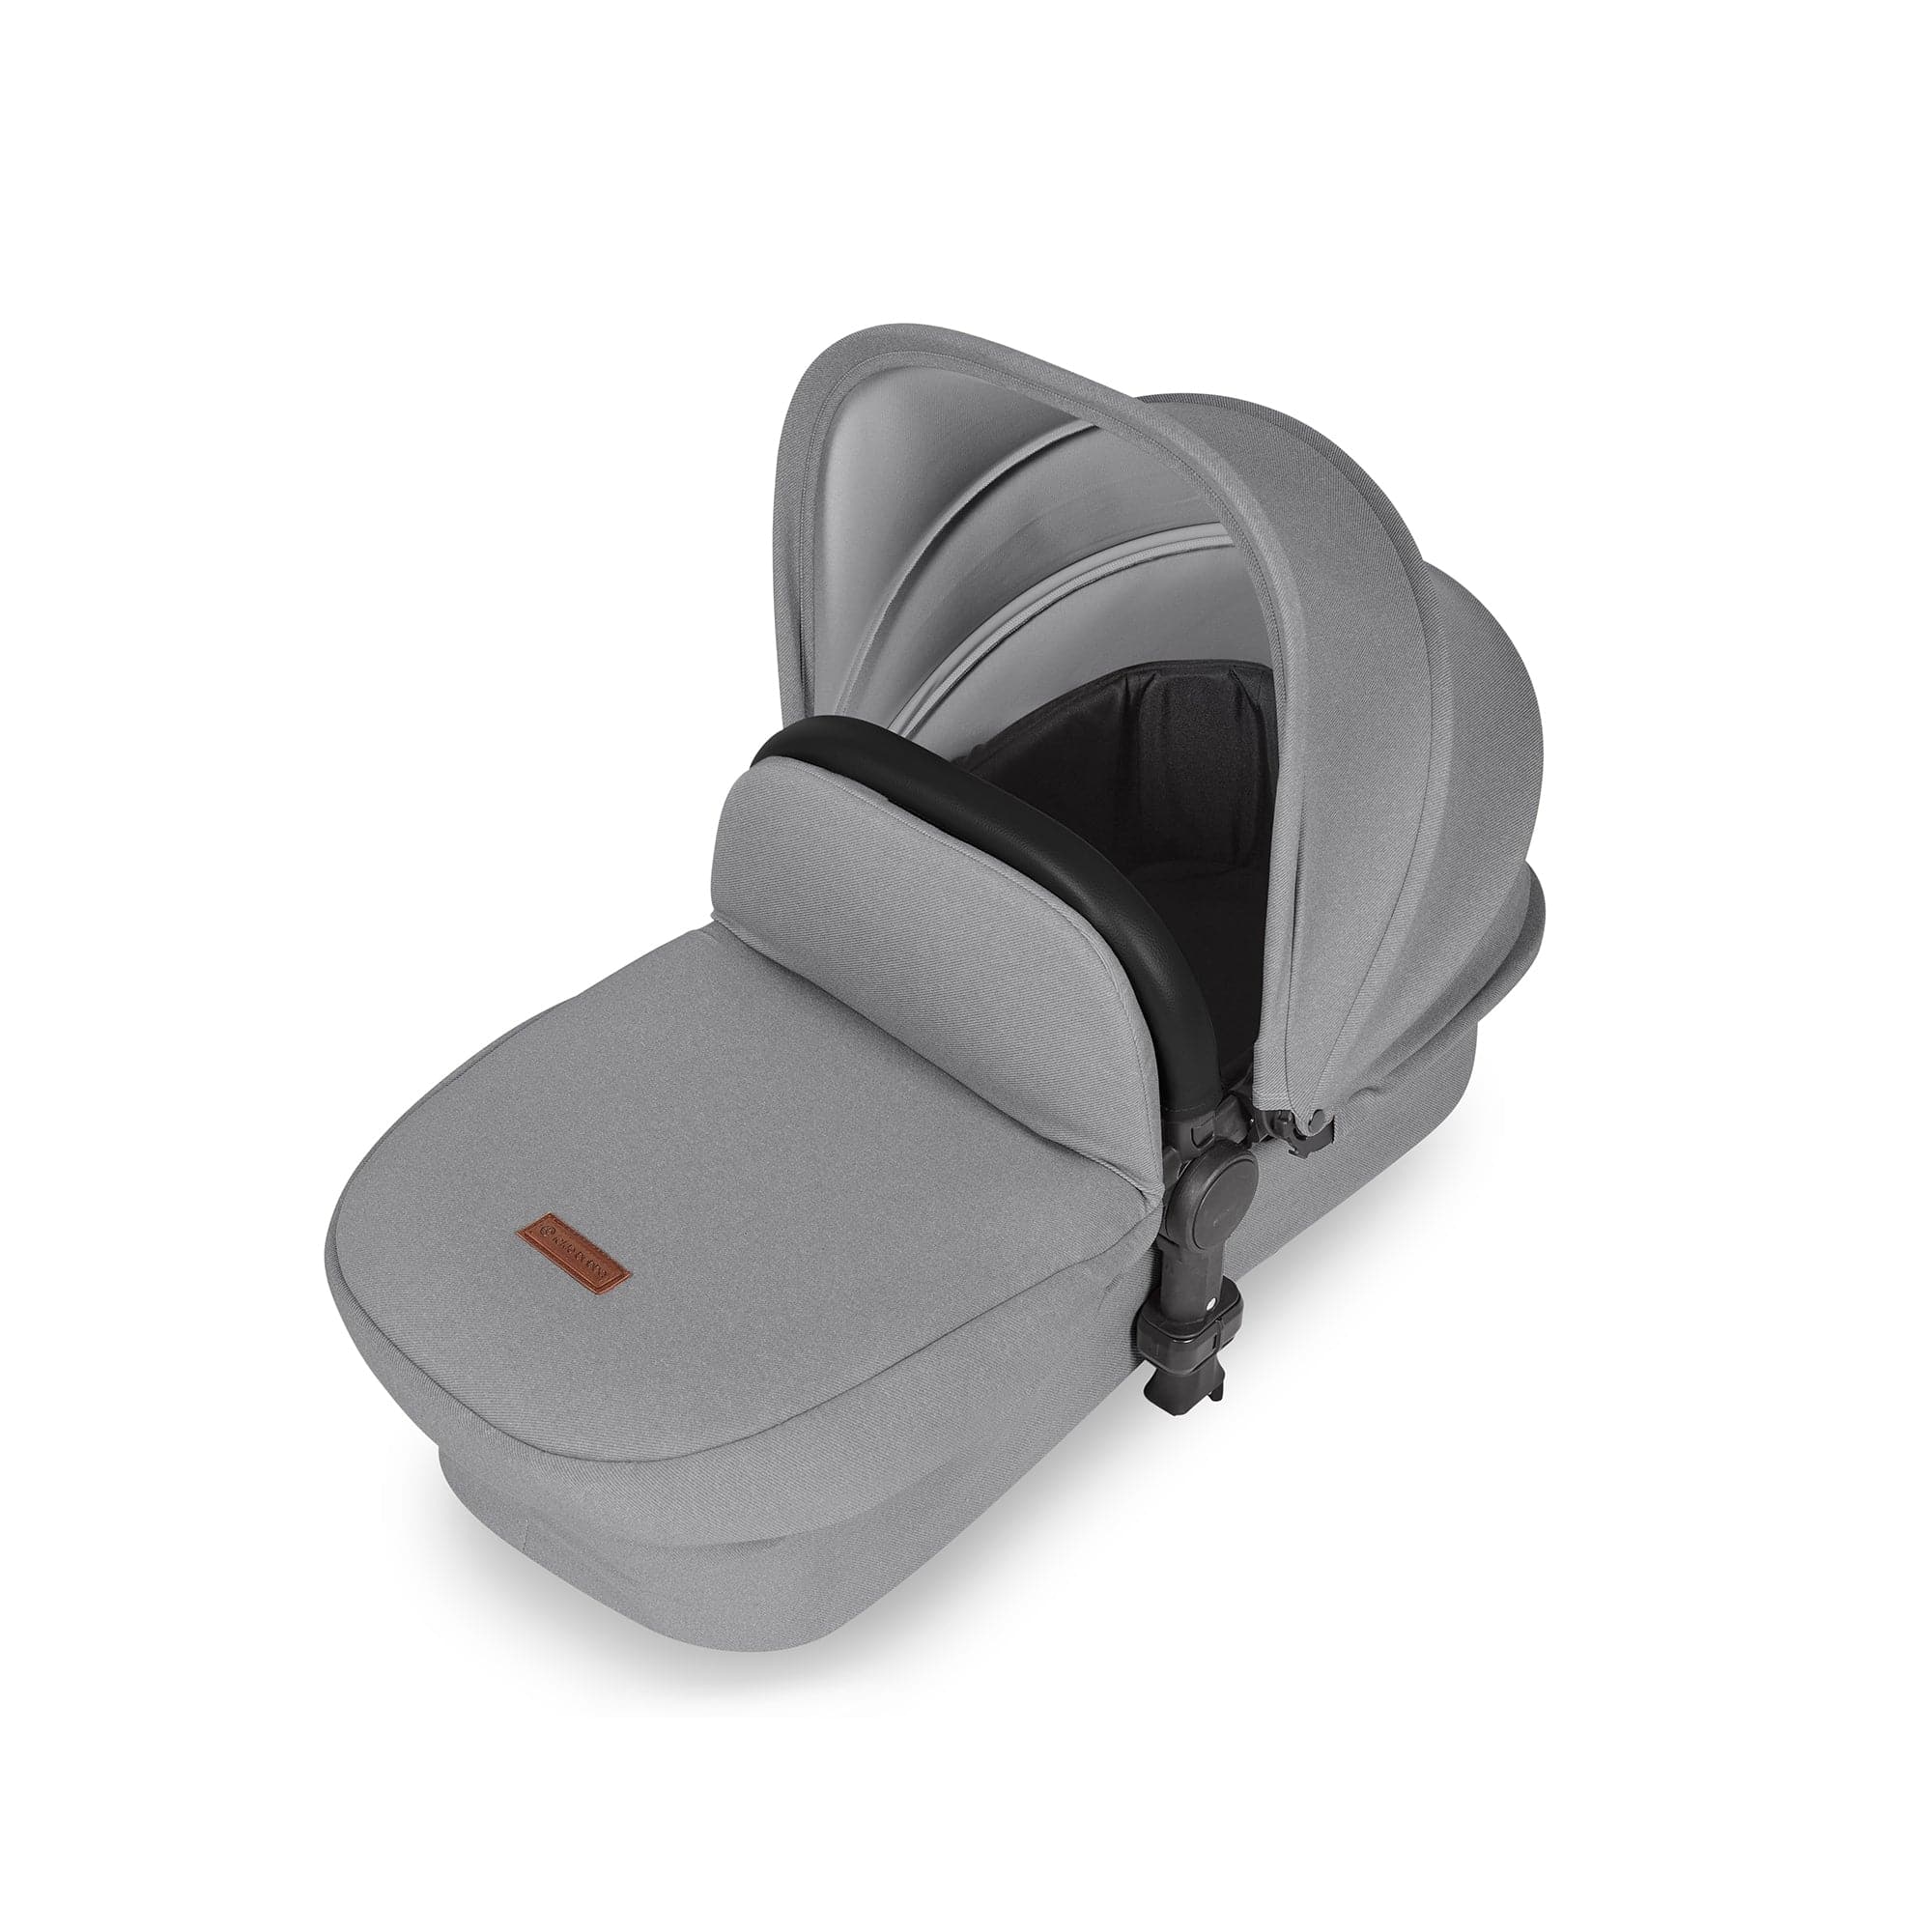 Ickle Bubba Stomp Luxe All-In-One I-Size Travel System With Isofix Base- Black / Pearl Grey / Black -  | For Your Little One